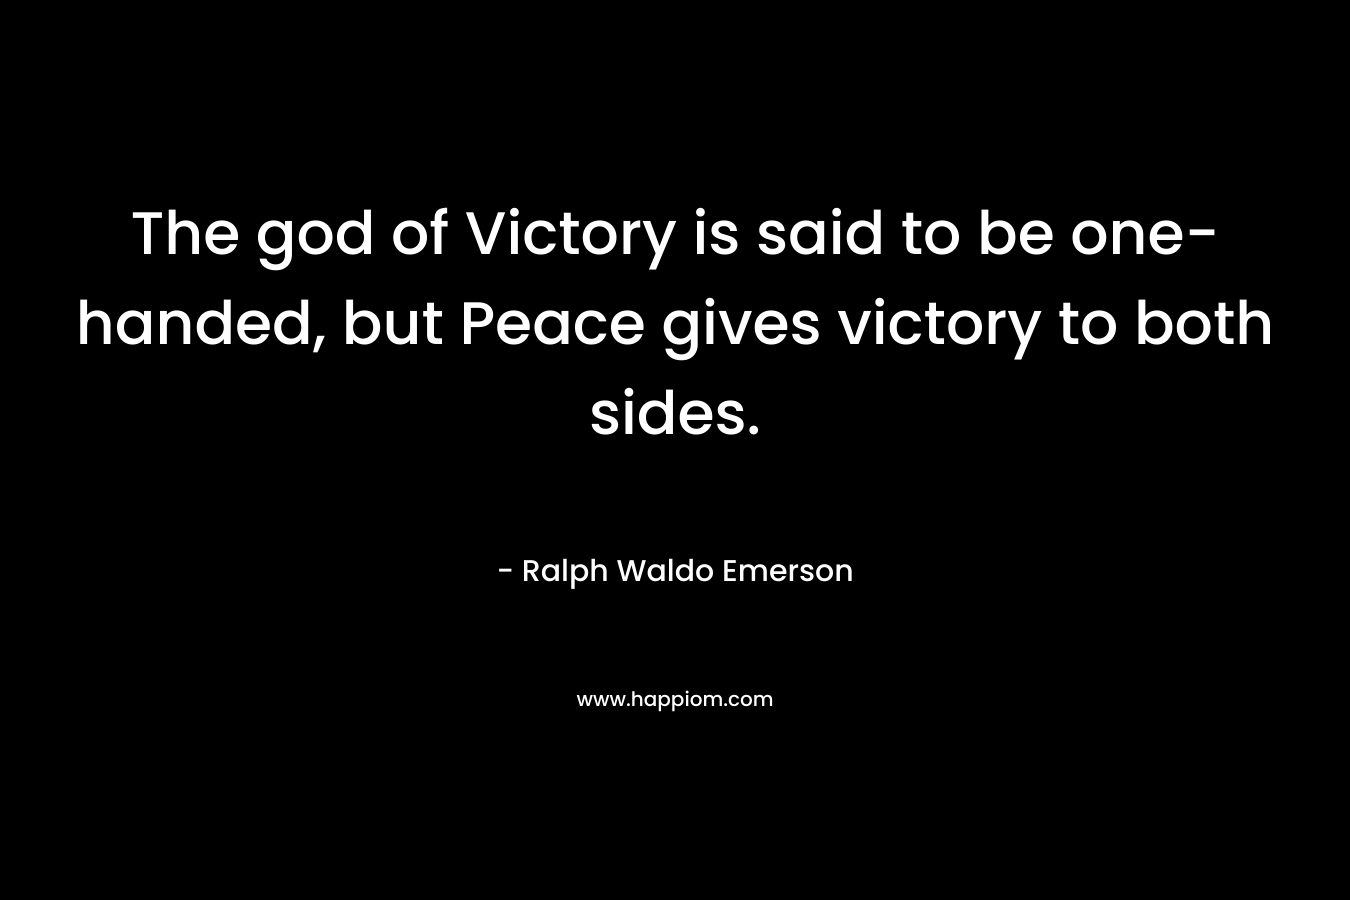 The god of Victory is said to be one-handed, but Peace gives victory to both sides.